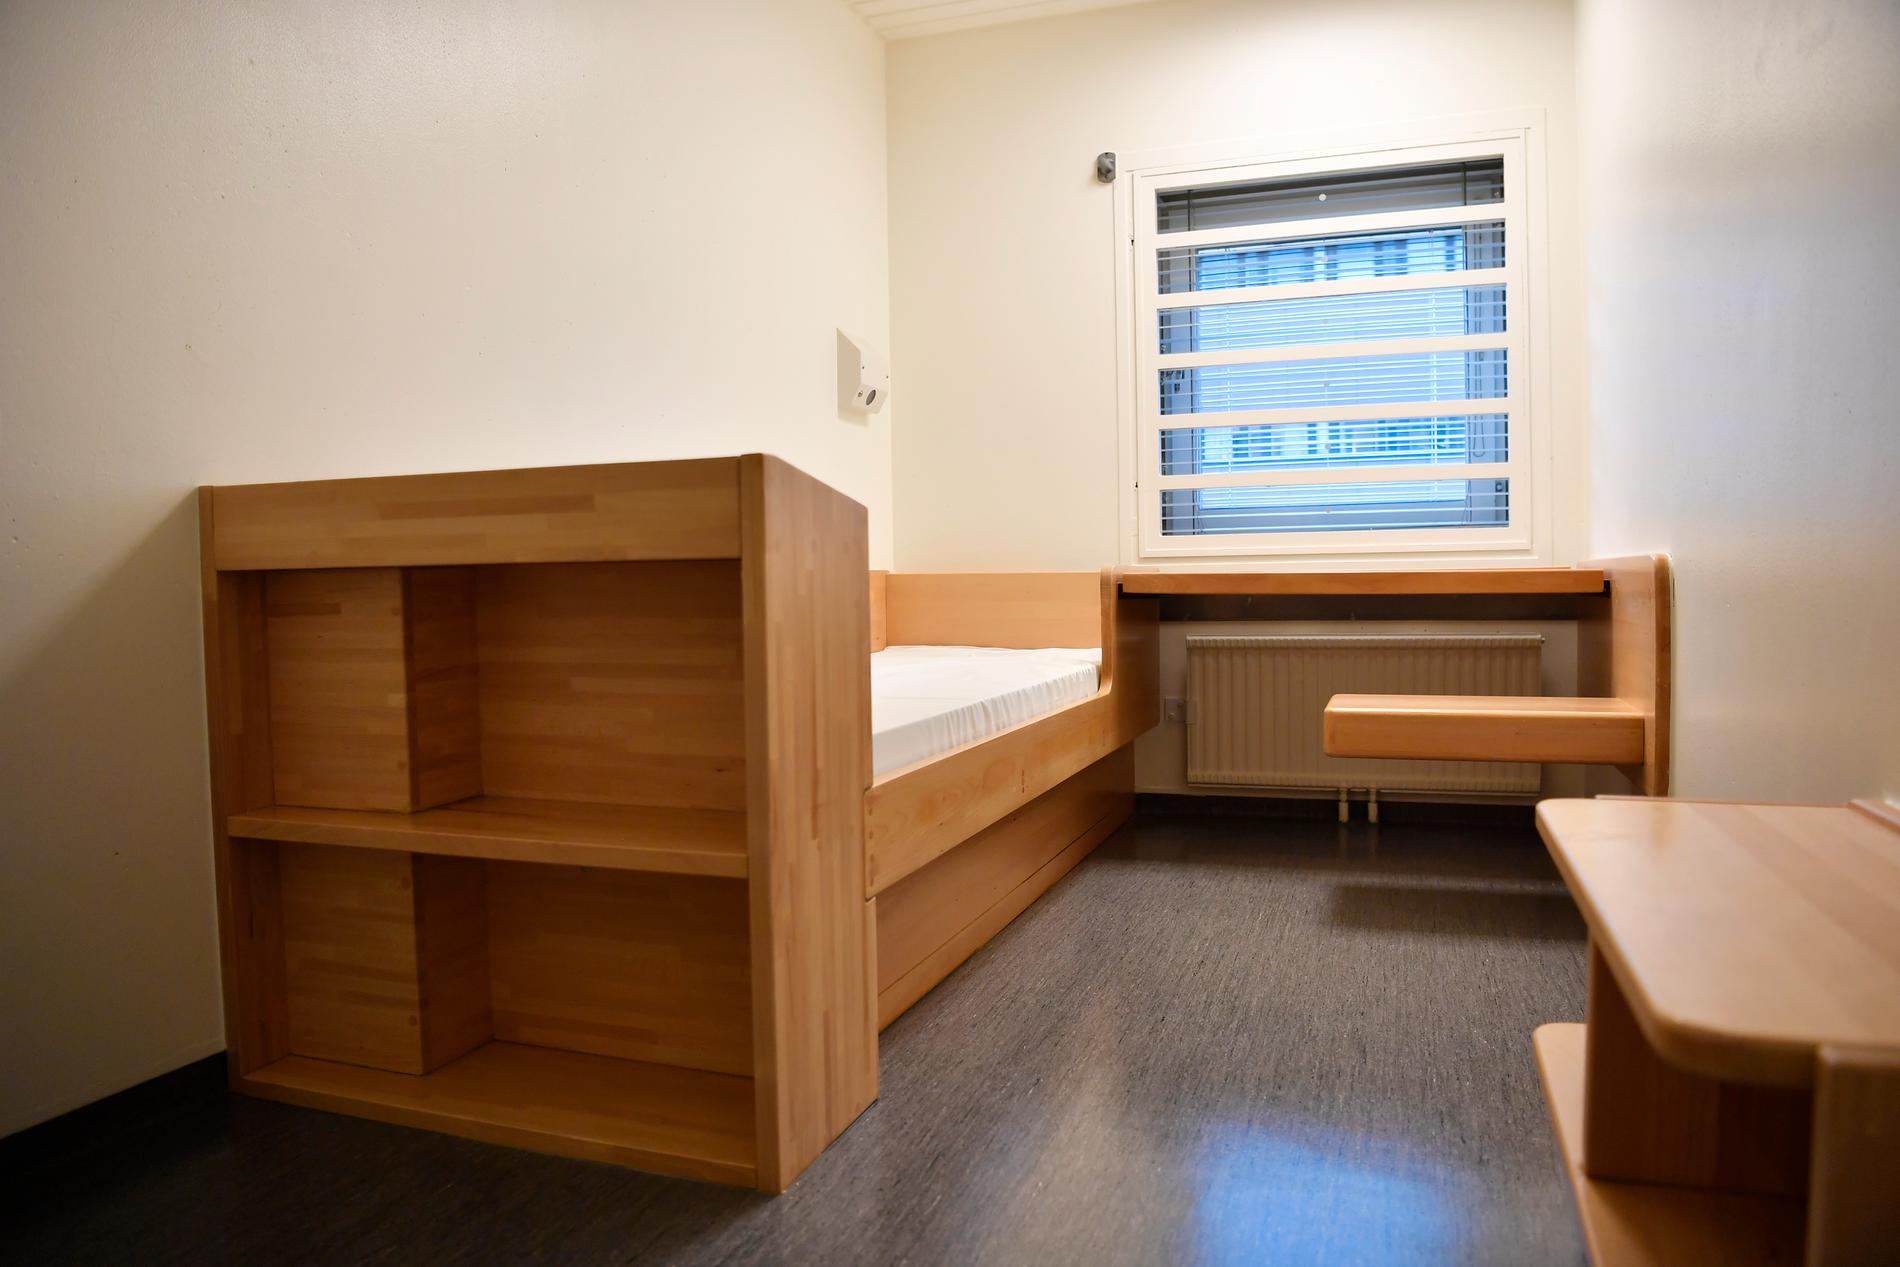 All inmates at the Kronoberg jail have single cells, with a bed, a desk and storage spaces.